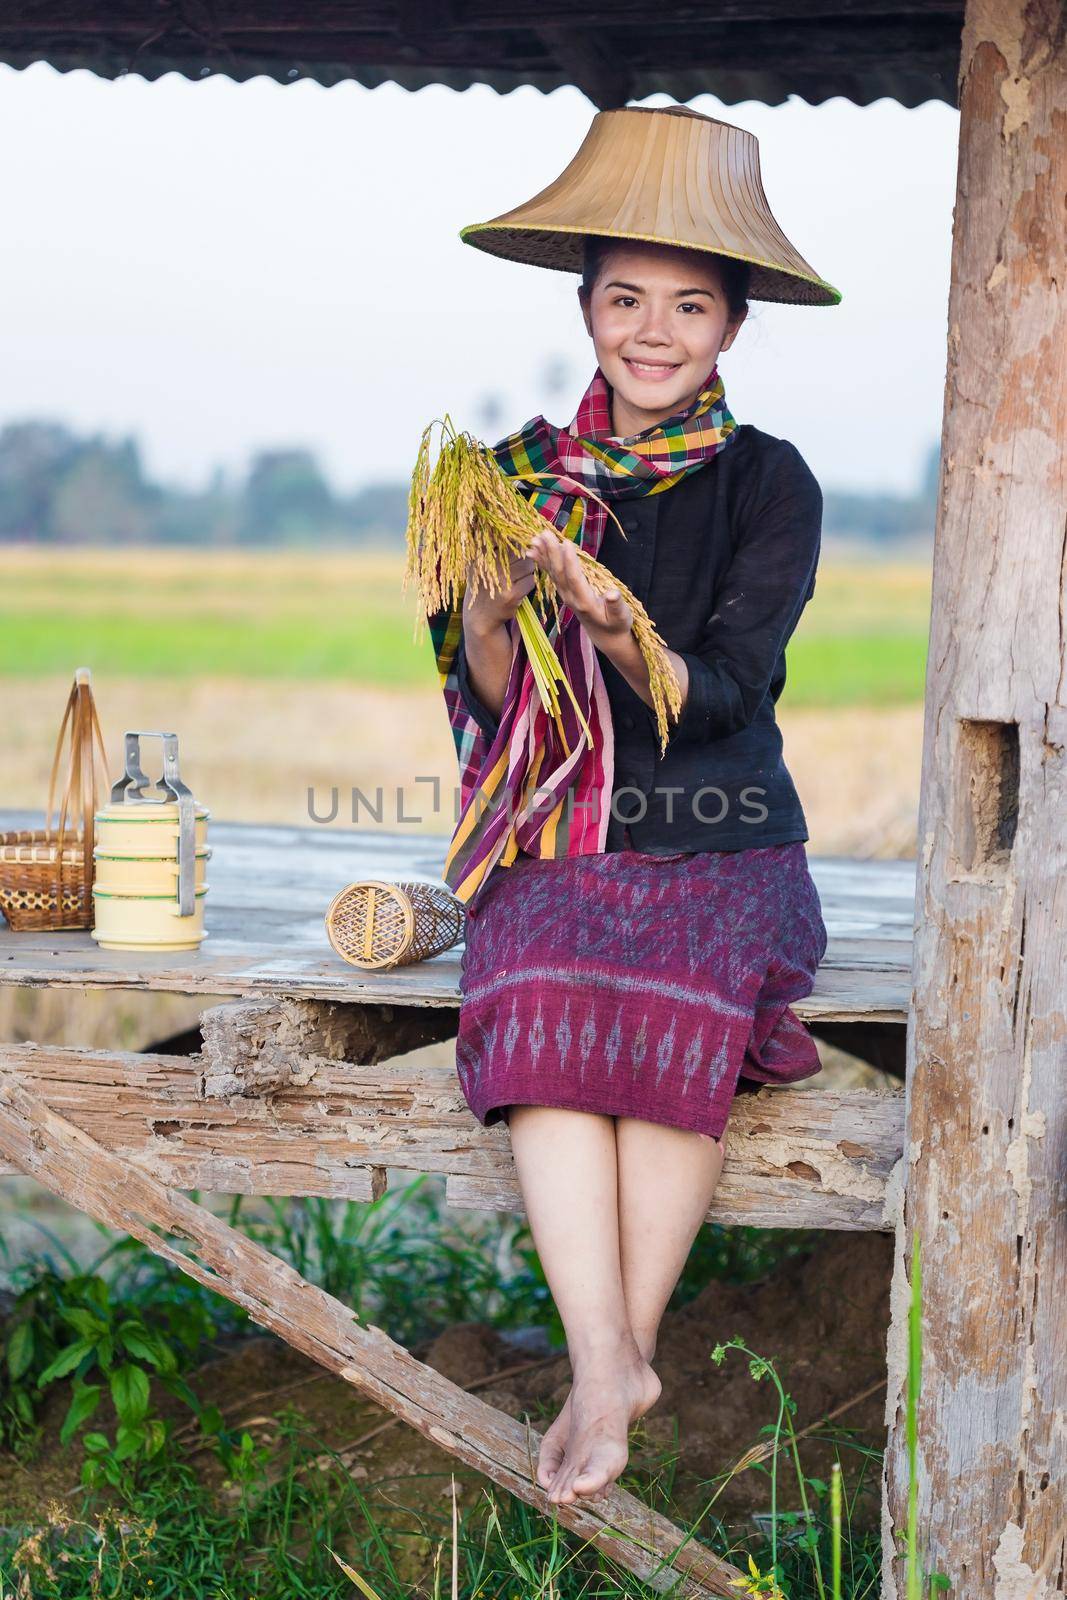 farmer woman holding rice and sitting in cottage at rice field, Thailand